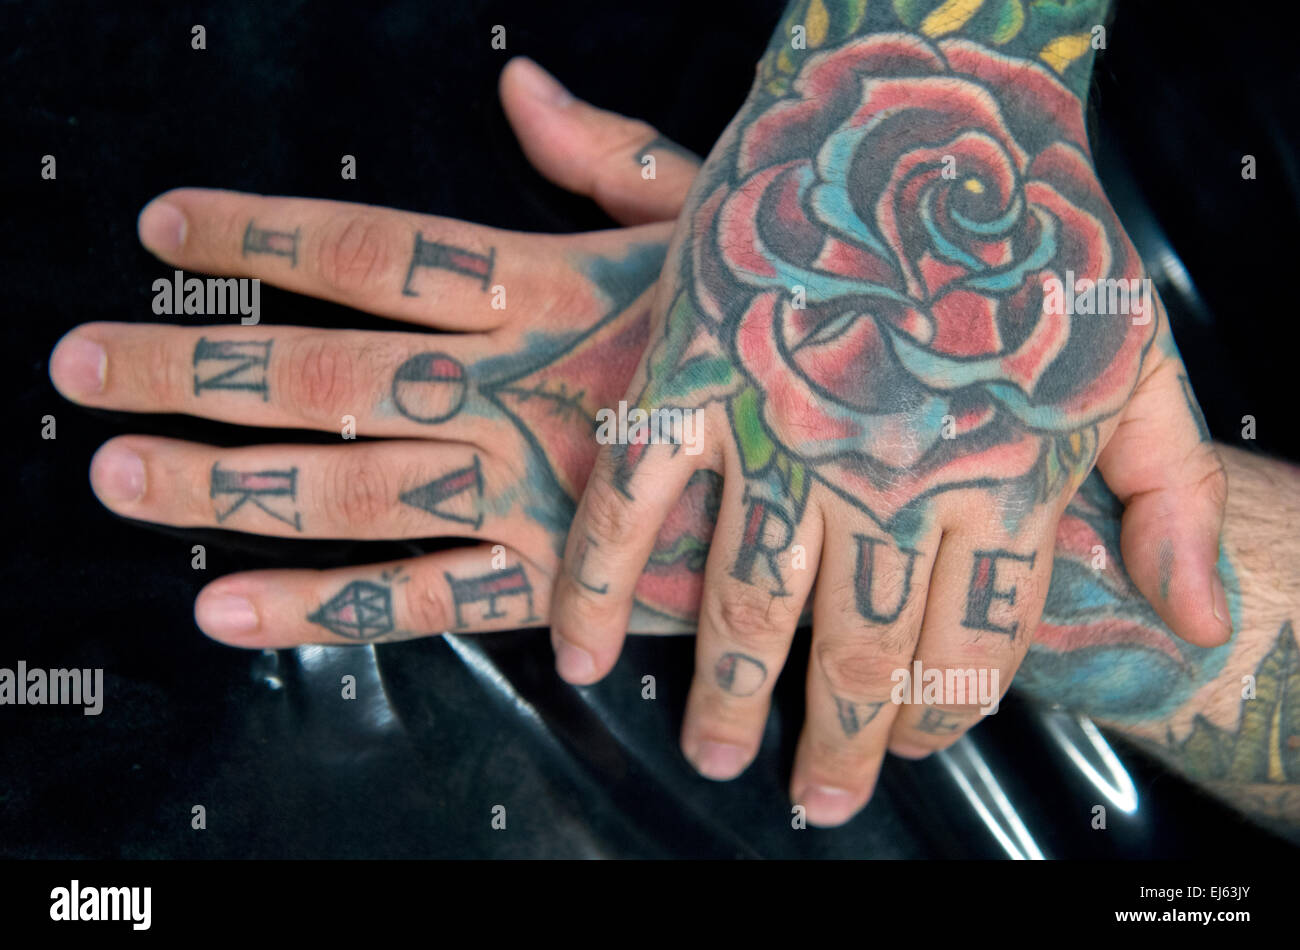 'True love' can be read on the hands of a tattooed man at the International Tattoo Convention in Frankfurt am Main, Germany, 21 March 2015. Tattoo artists from around the world show off their talents at various booths. Visitors can get their desired images tattooed on site. Photo: BORIS ROESSLER/dpa Stock Photo